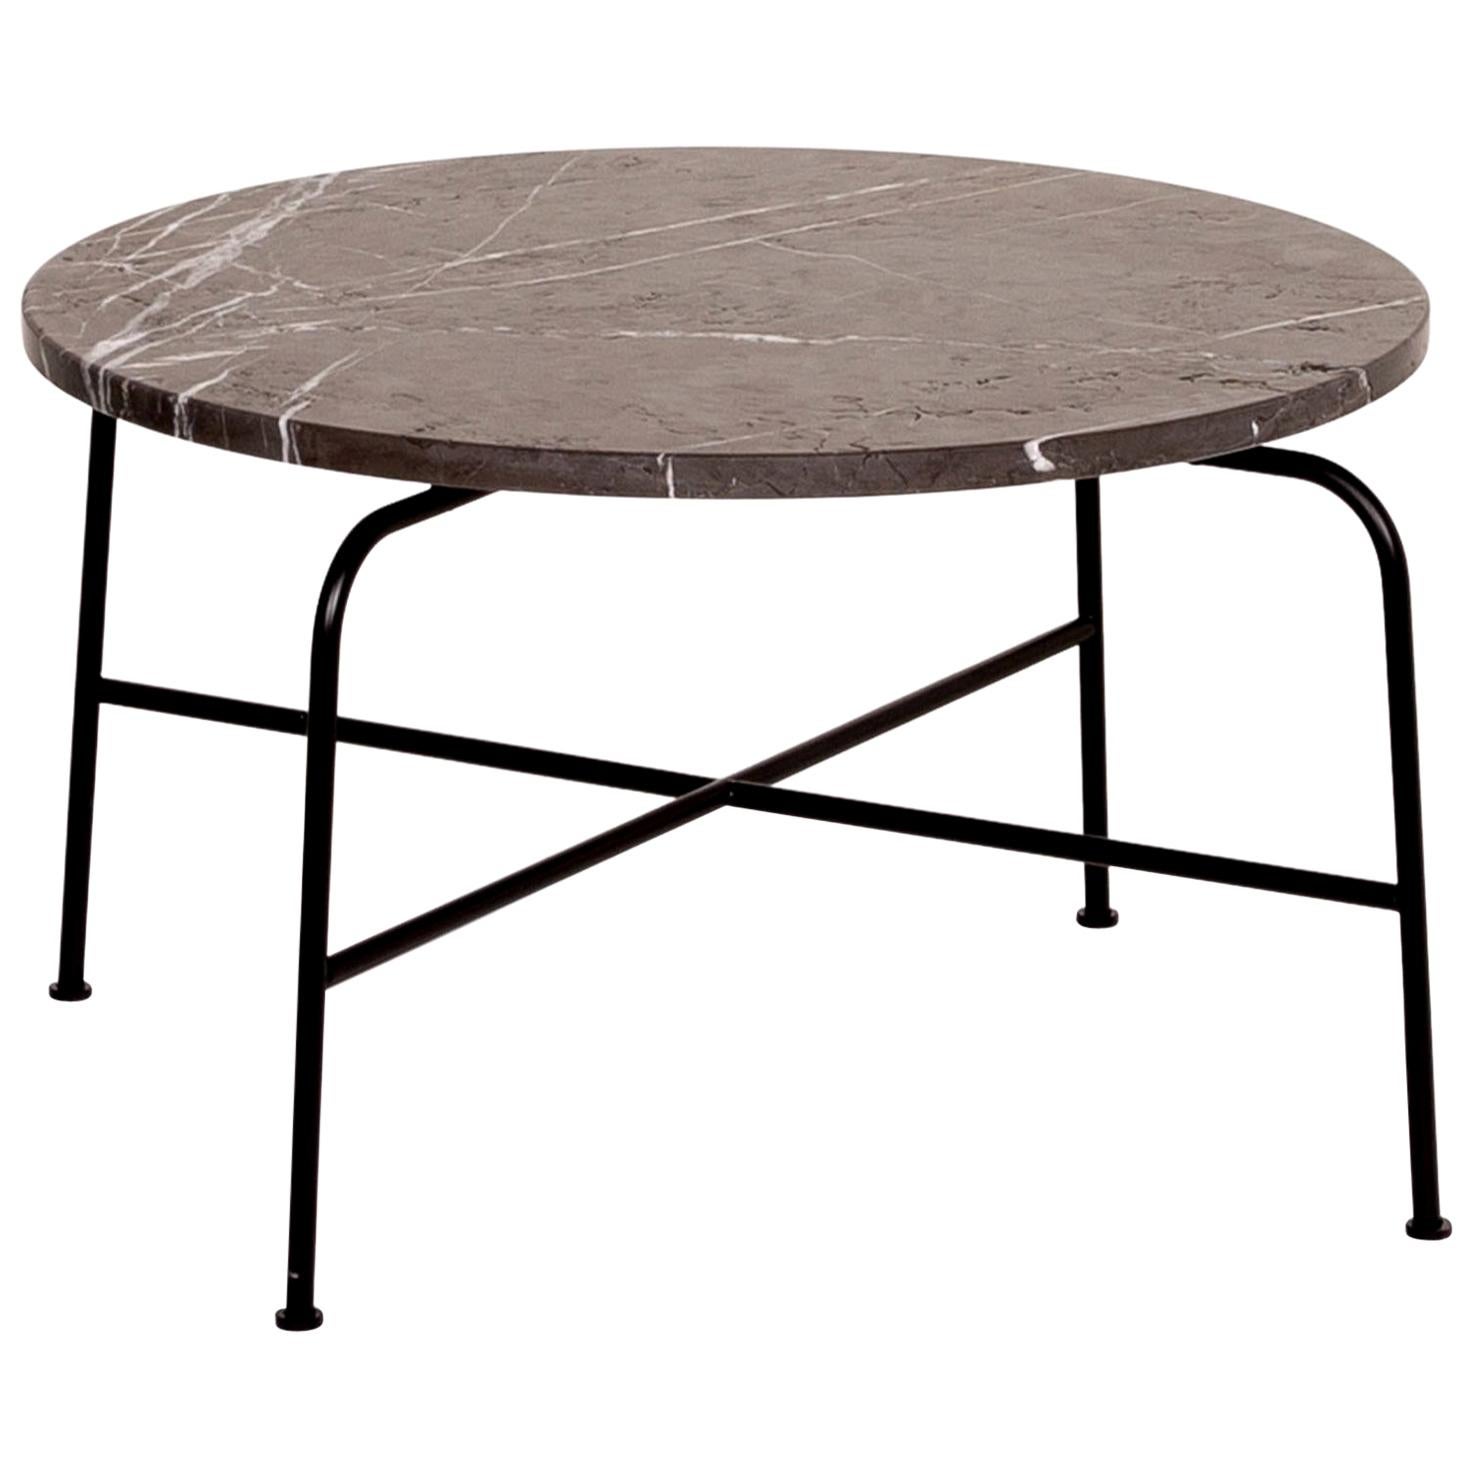 Rolf Benz 947 Graphite Coffee Table Anthracite Marbled Table Industrial For Sale